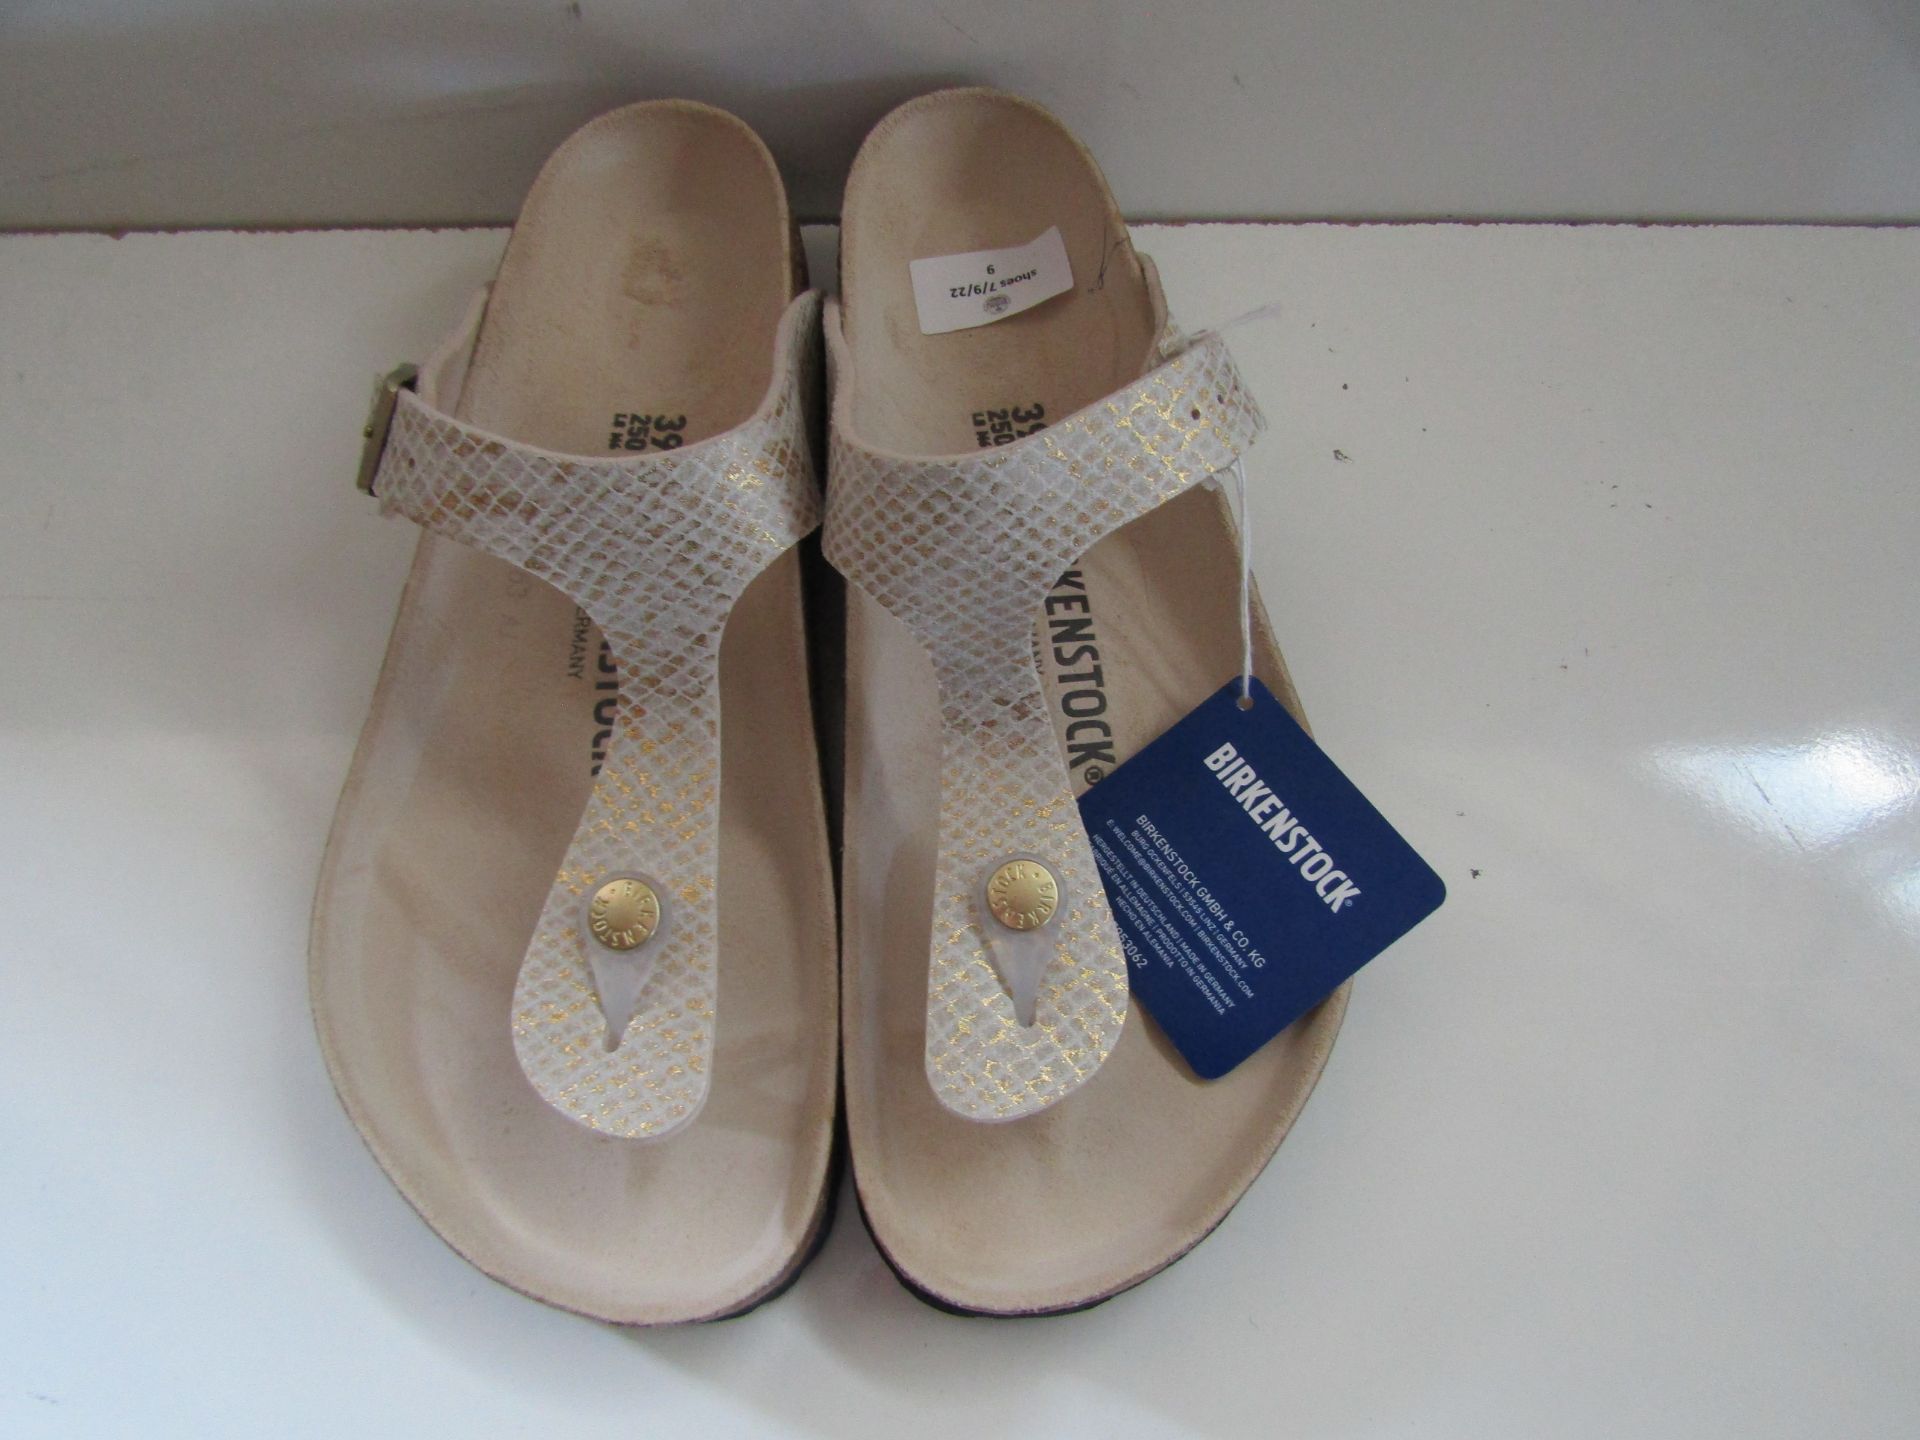 Birkenstock Thonged Sandal Size 39 New With Tags - Image 3 of 3